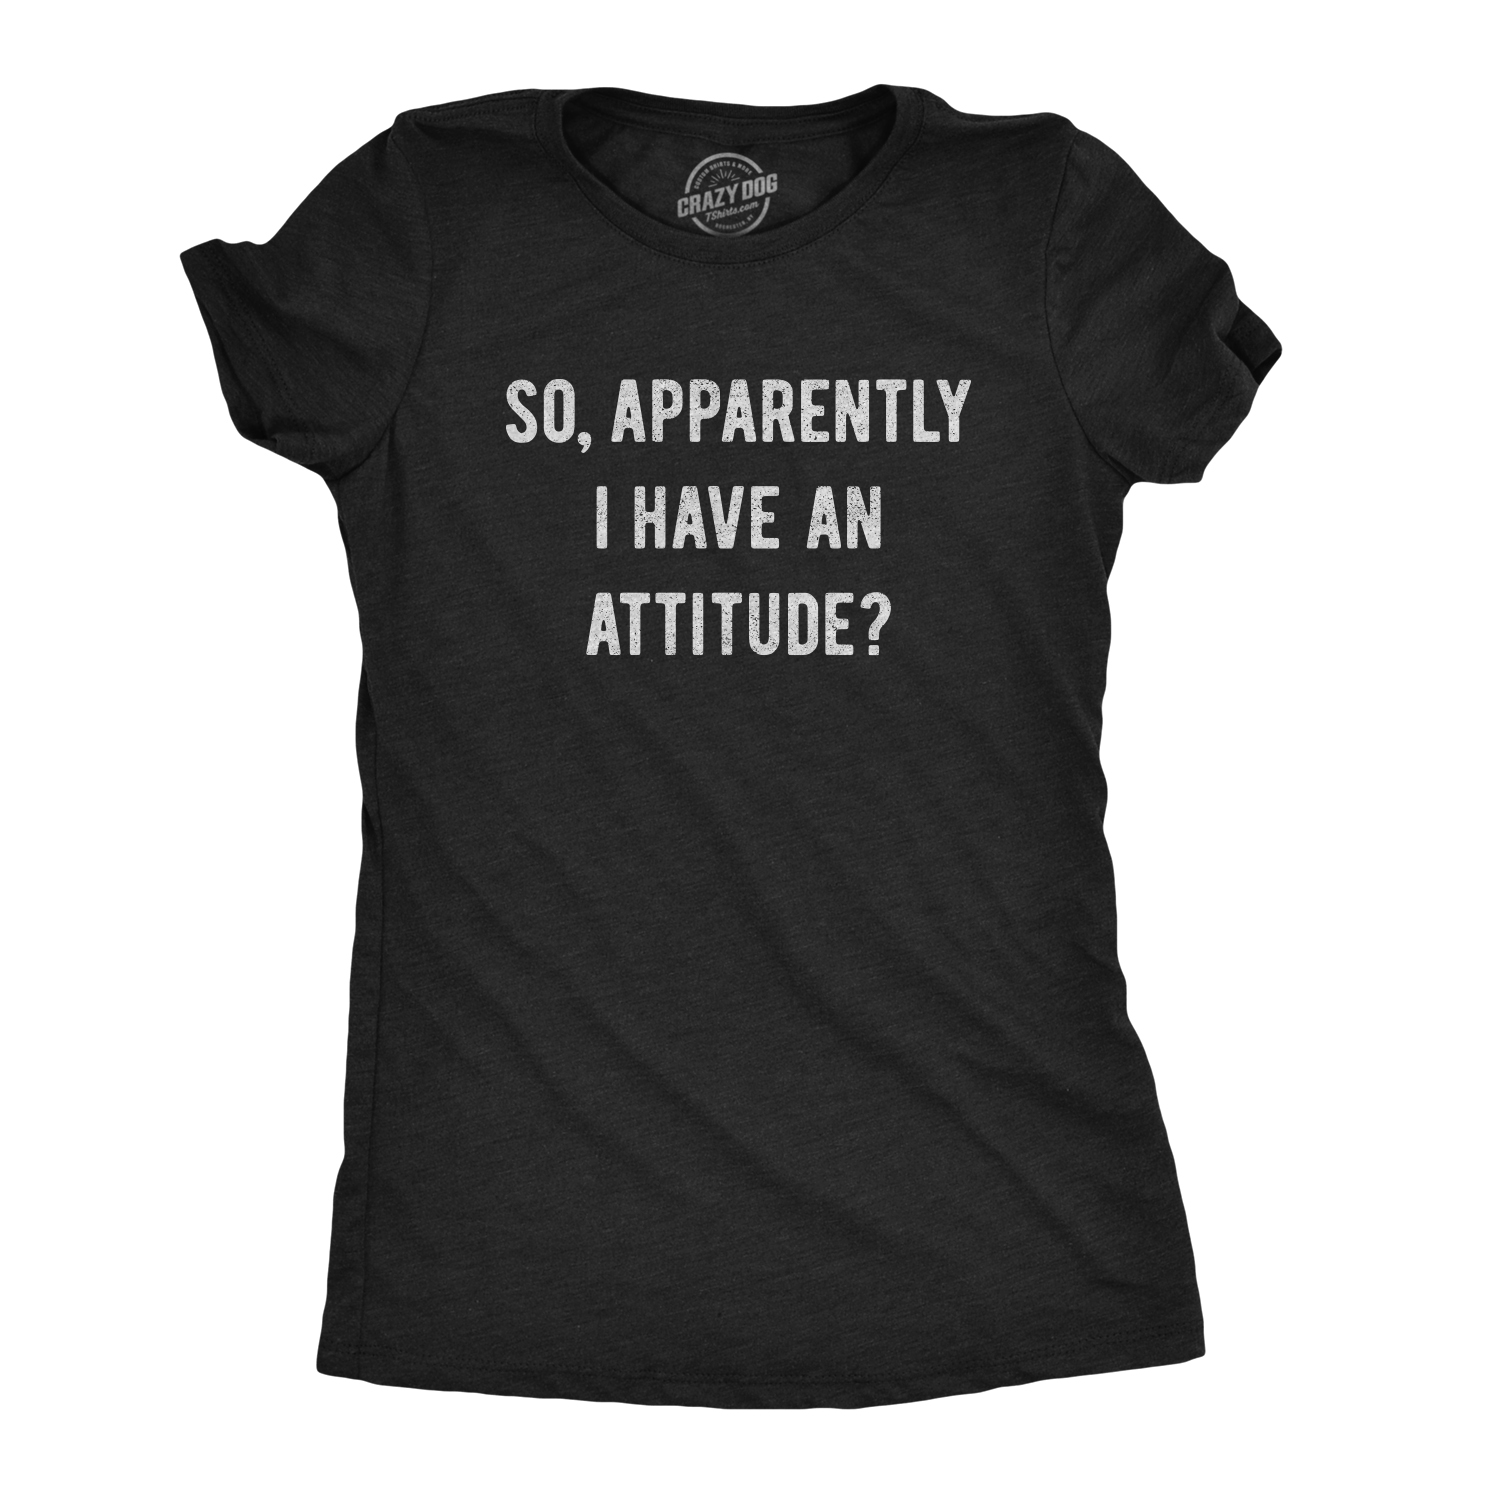 Crazy Dog Tshirts Womens So Apparently I Have An Attitude T shirt Funny Sayings Sarcastic Tee